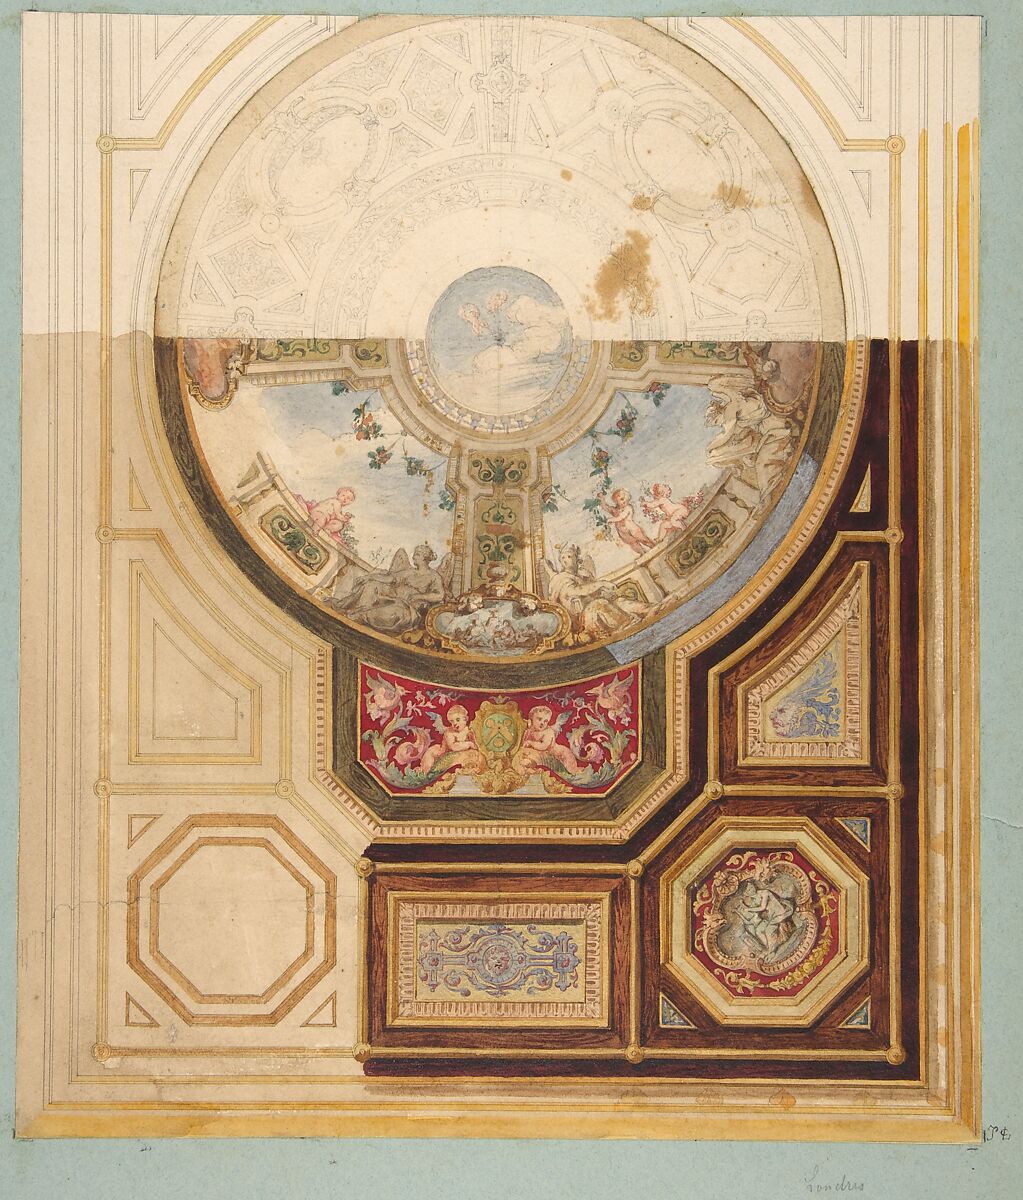 Design for a paneled ceiling with a trompe l'oeil dome in London, Jules-Edmond-Charles Lachaise (French, died 1897), graphite, watercolor, and gold paint 